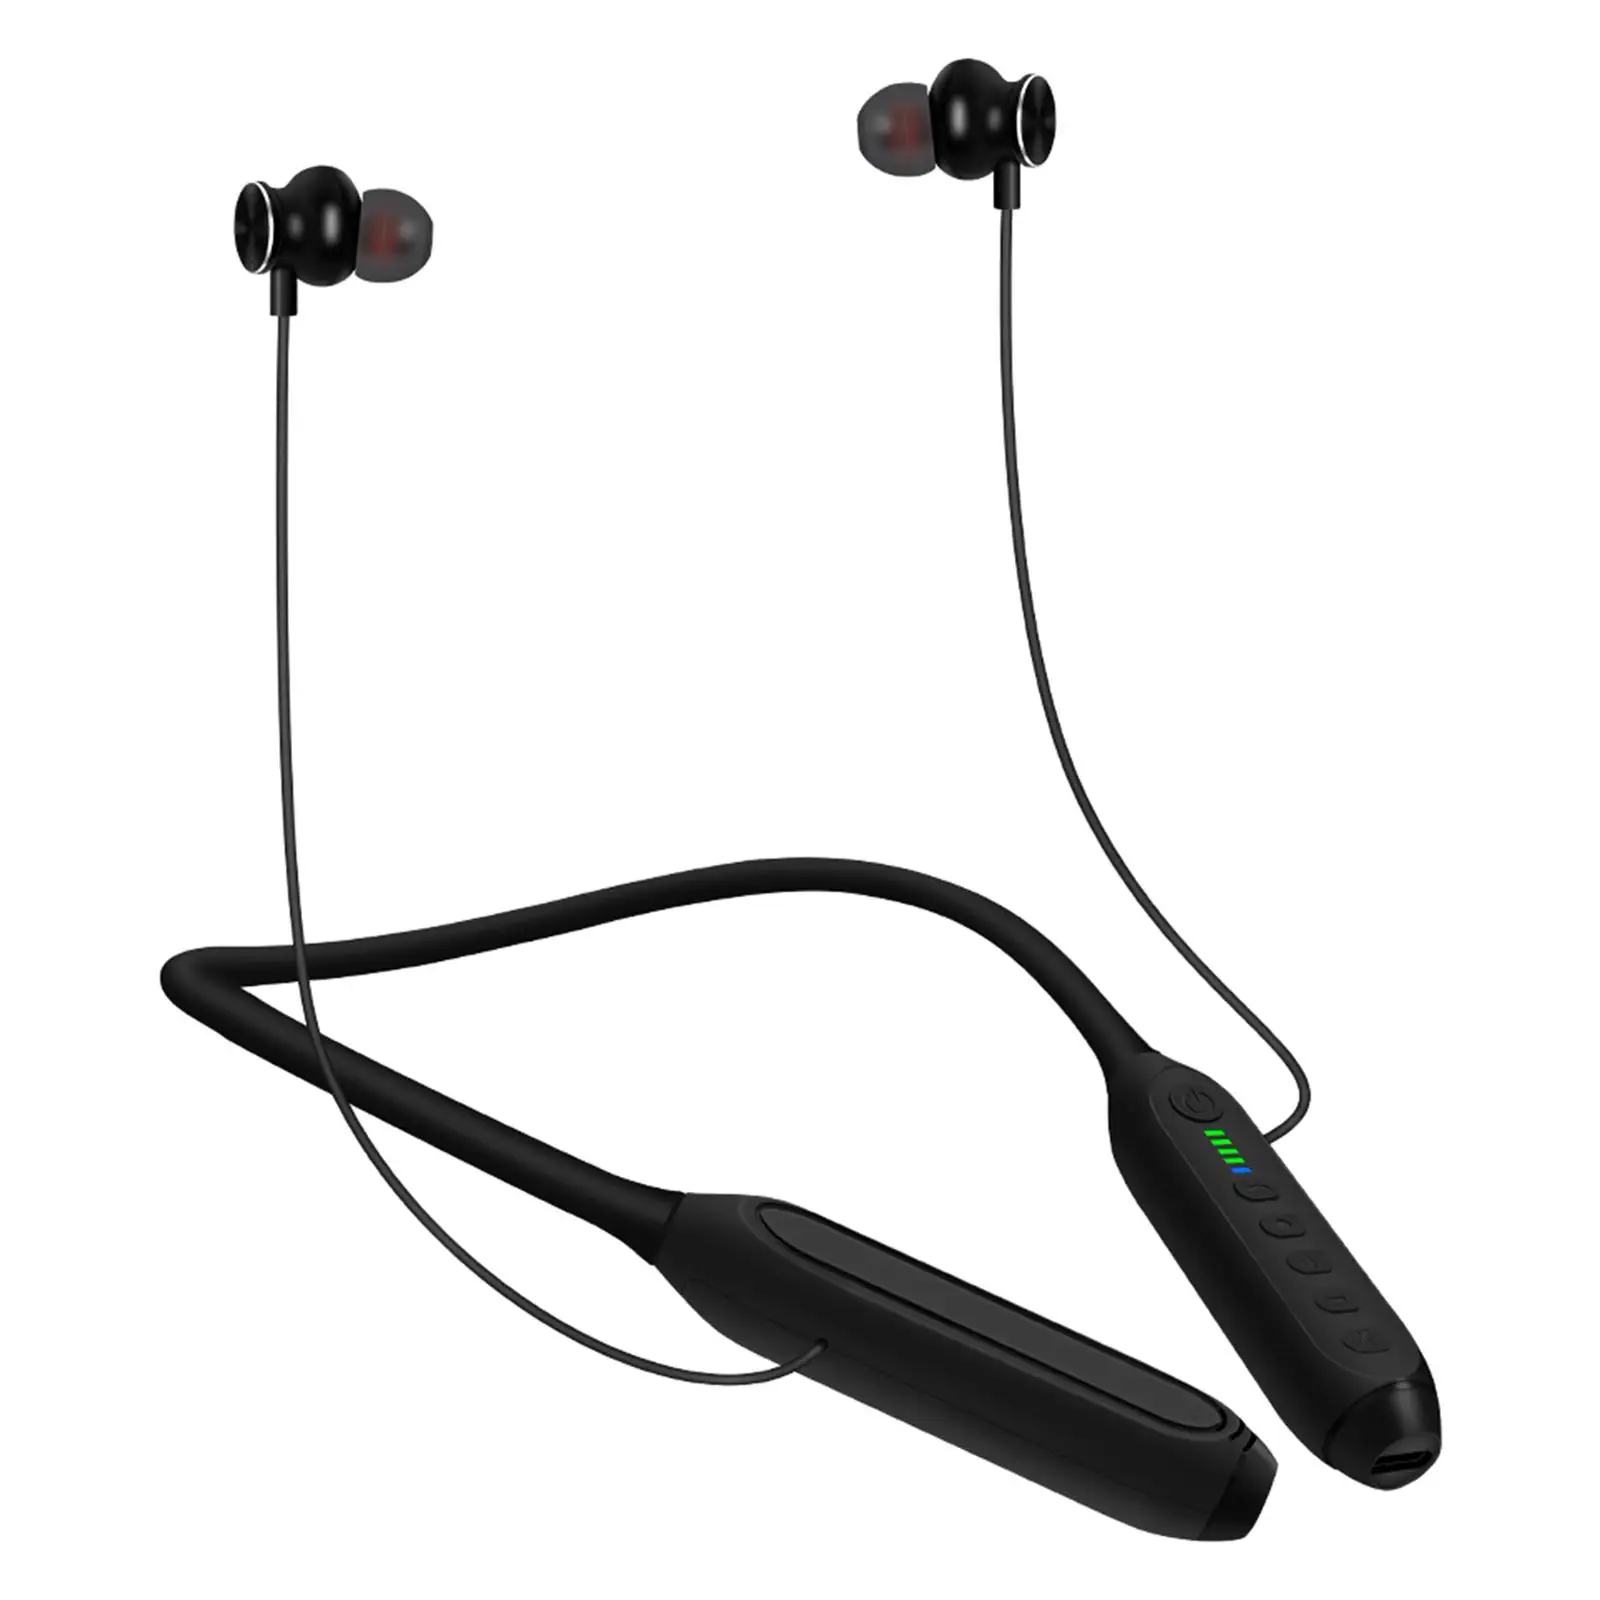 Neckband Bluetooth V5.3 Headphones HD Stereo W/Mic Sweatproof Cordless Comfortable Sport Earbuds Earphones for Conference Home